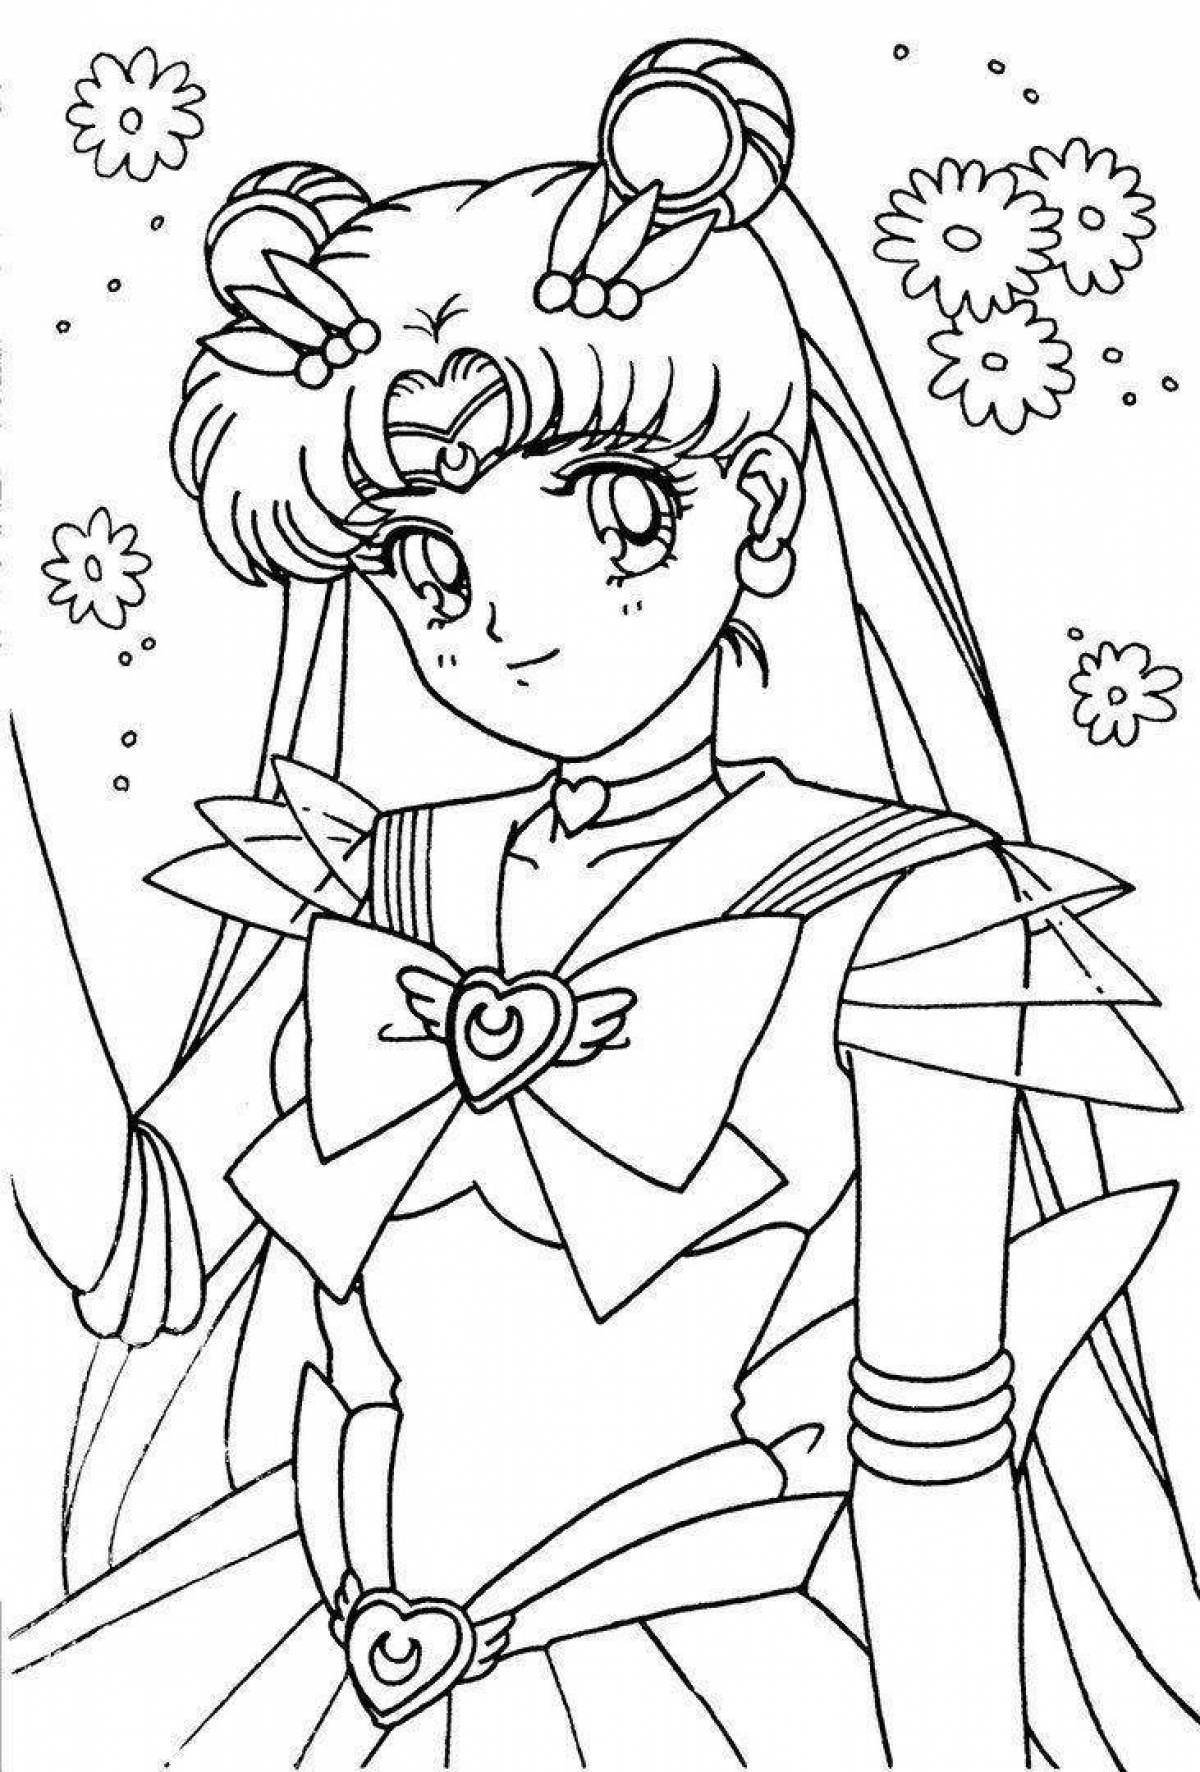 Sailor moon coloring page live